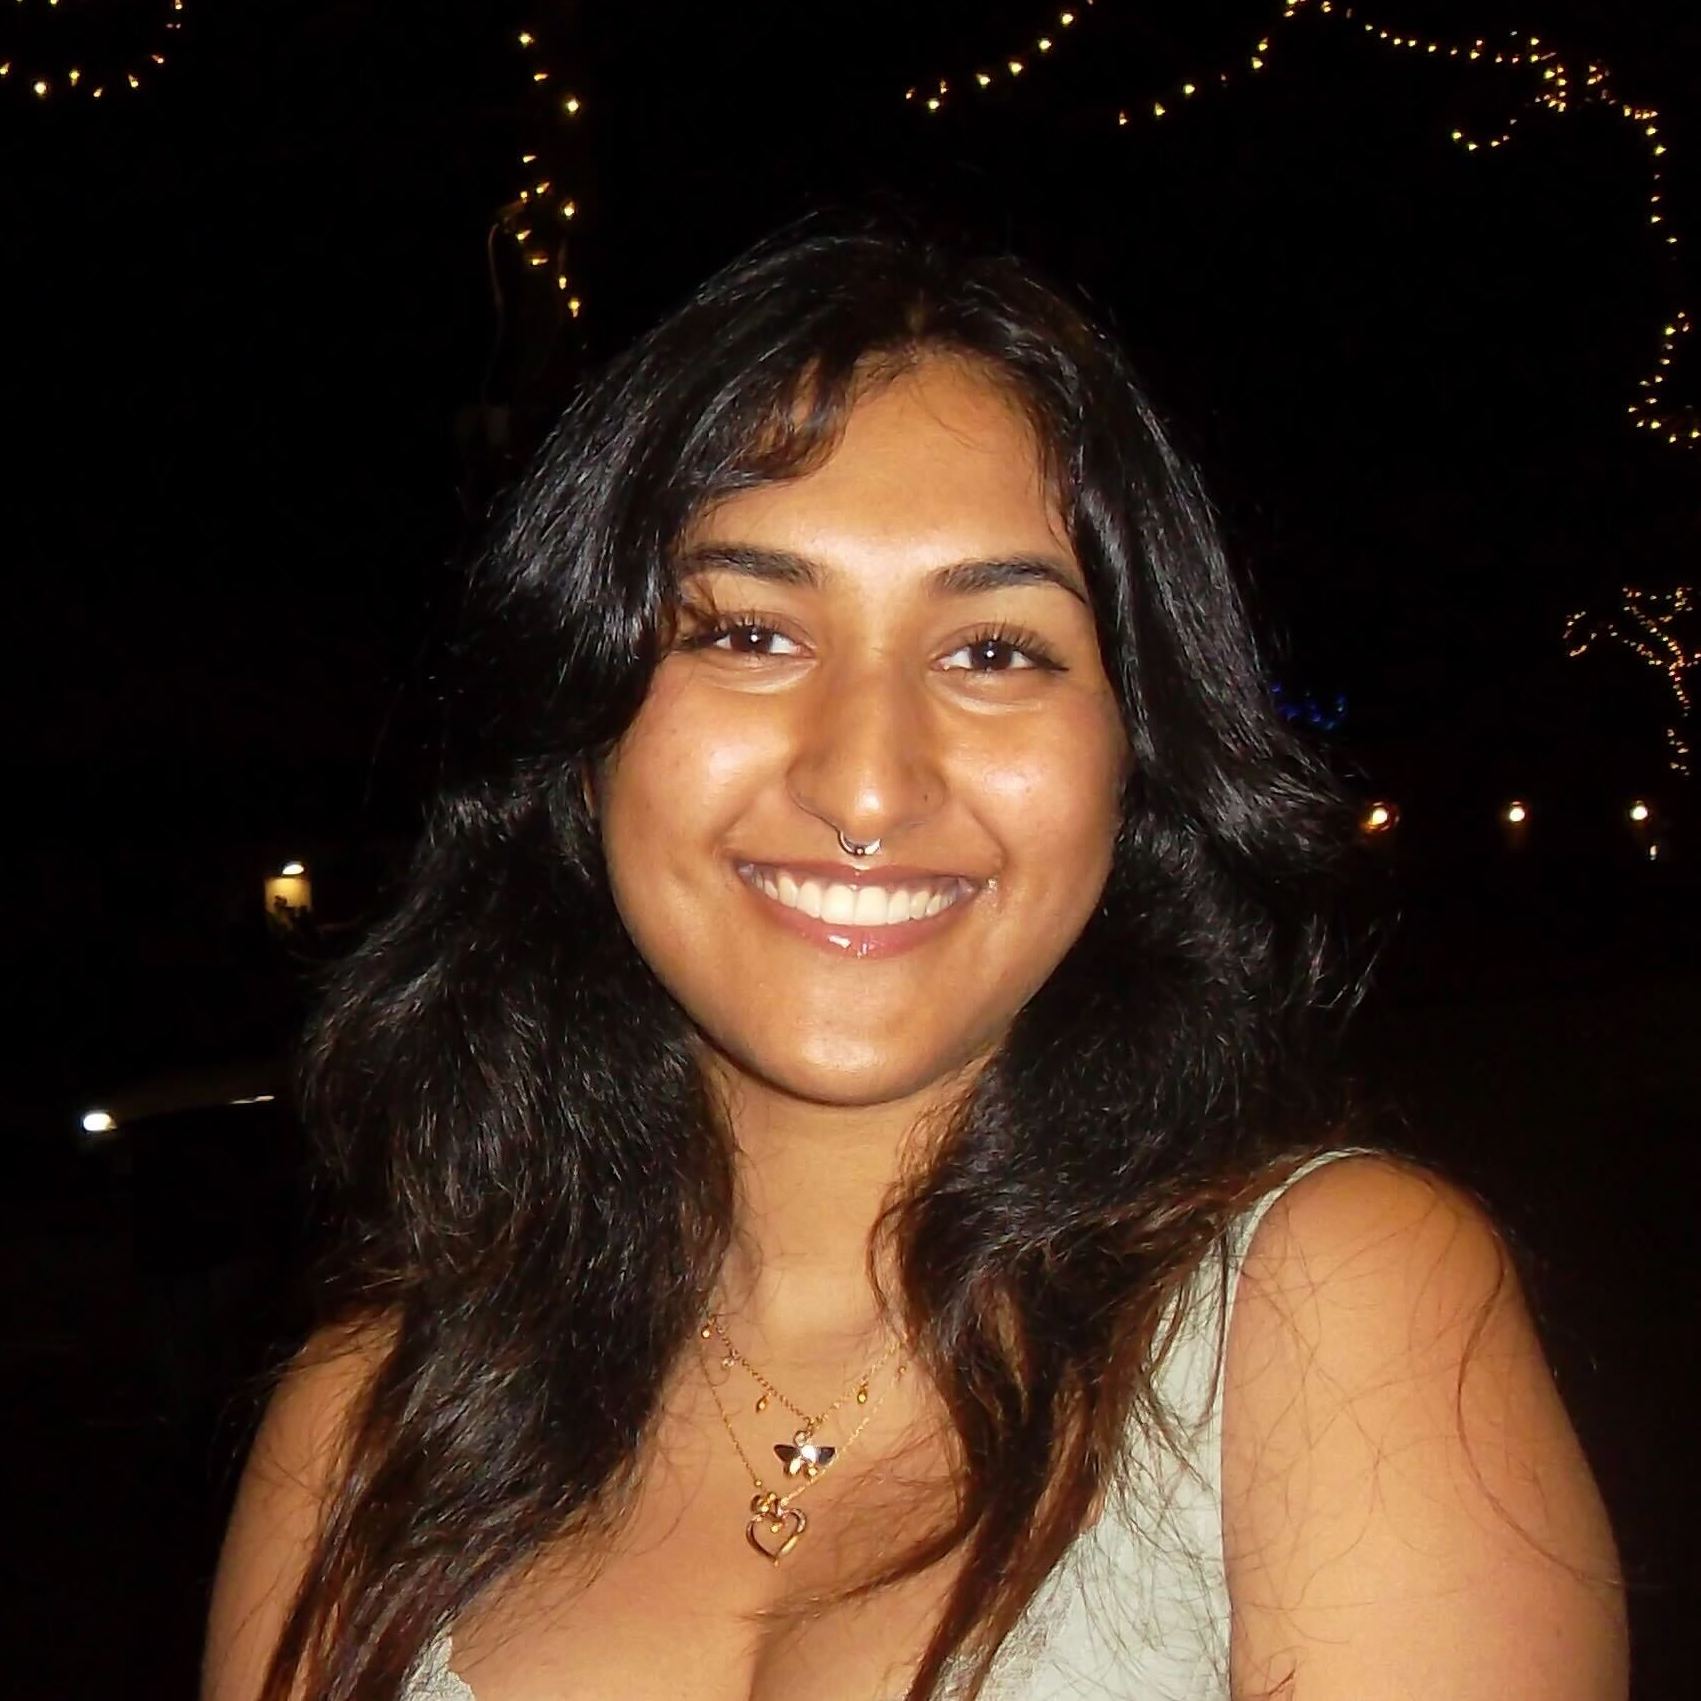 Rea, a woman of colour with long dark-brown hair, smiles to the camera. The background is nearly black, but a few yellow spots of light from the trees can be seen.